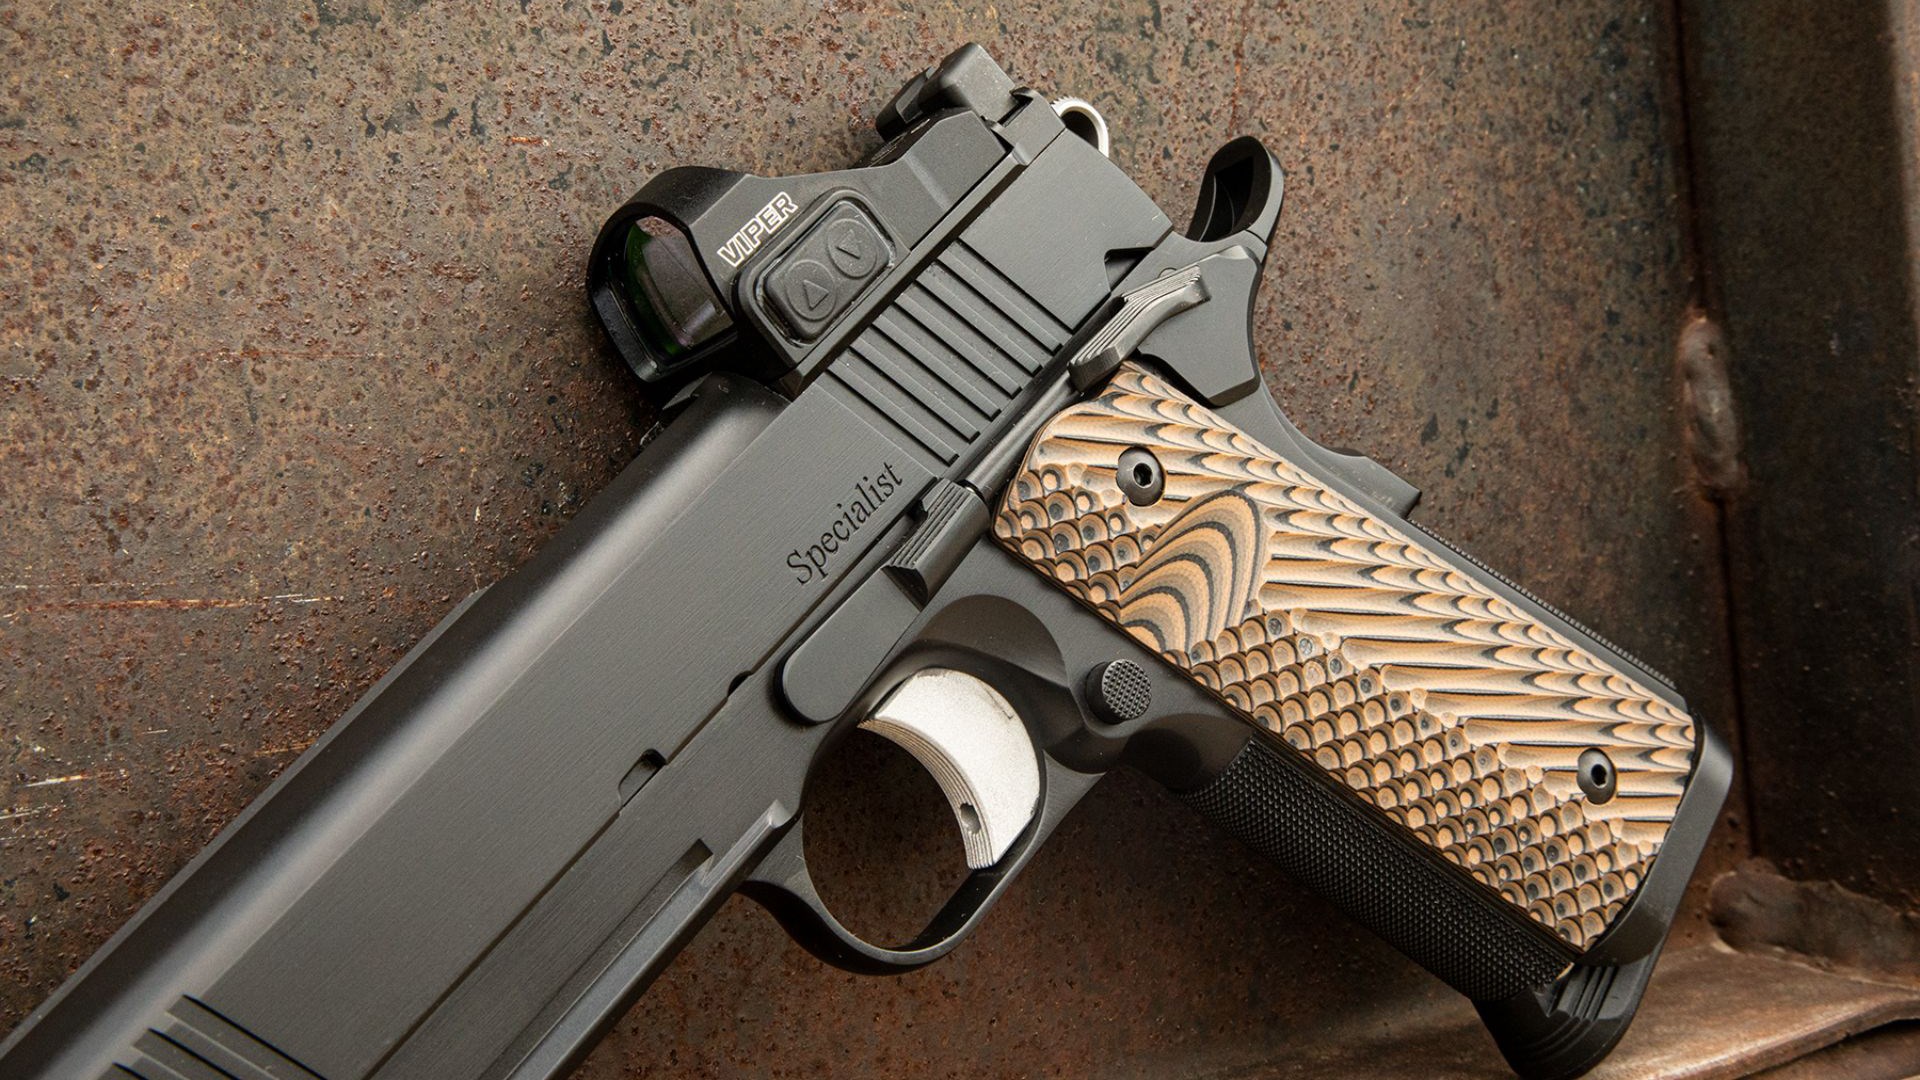 A close-up of the Dan Wesson 1911 Specialist Optics-Ready controls shown on a stone background.